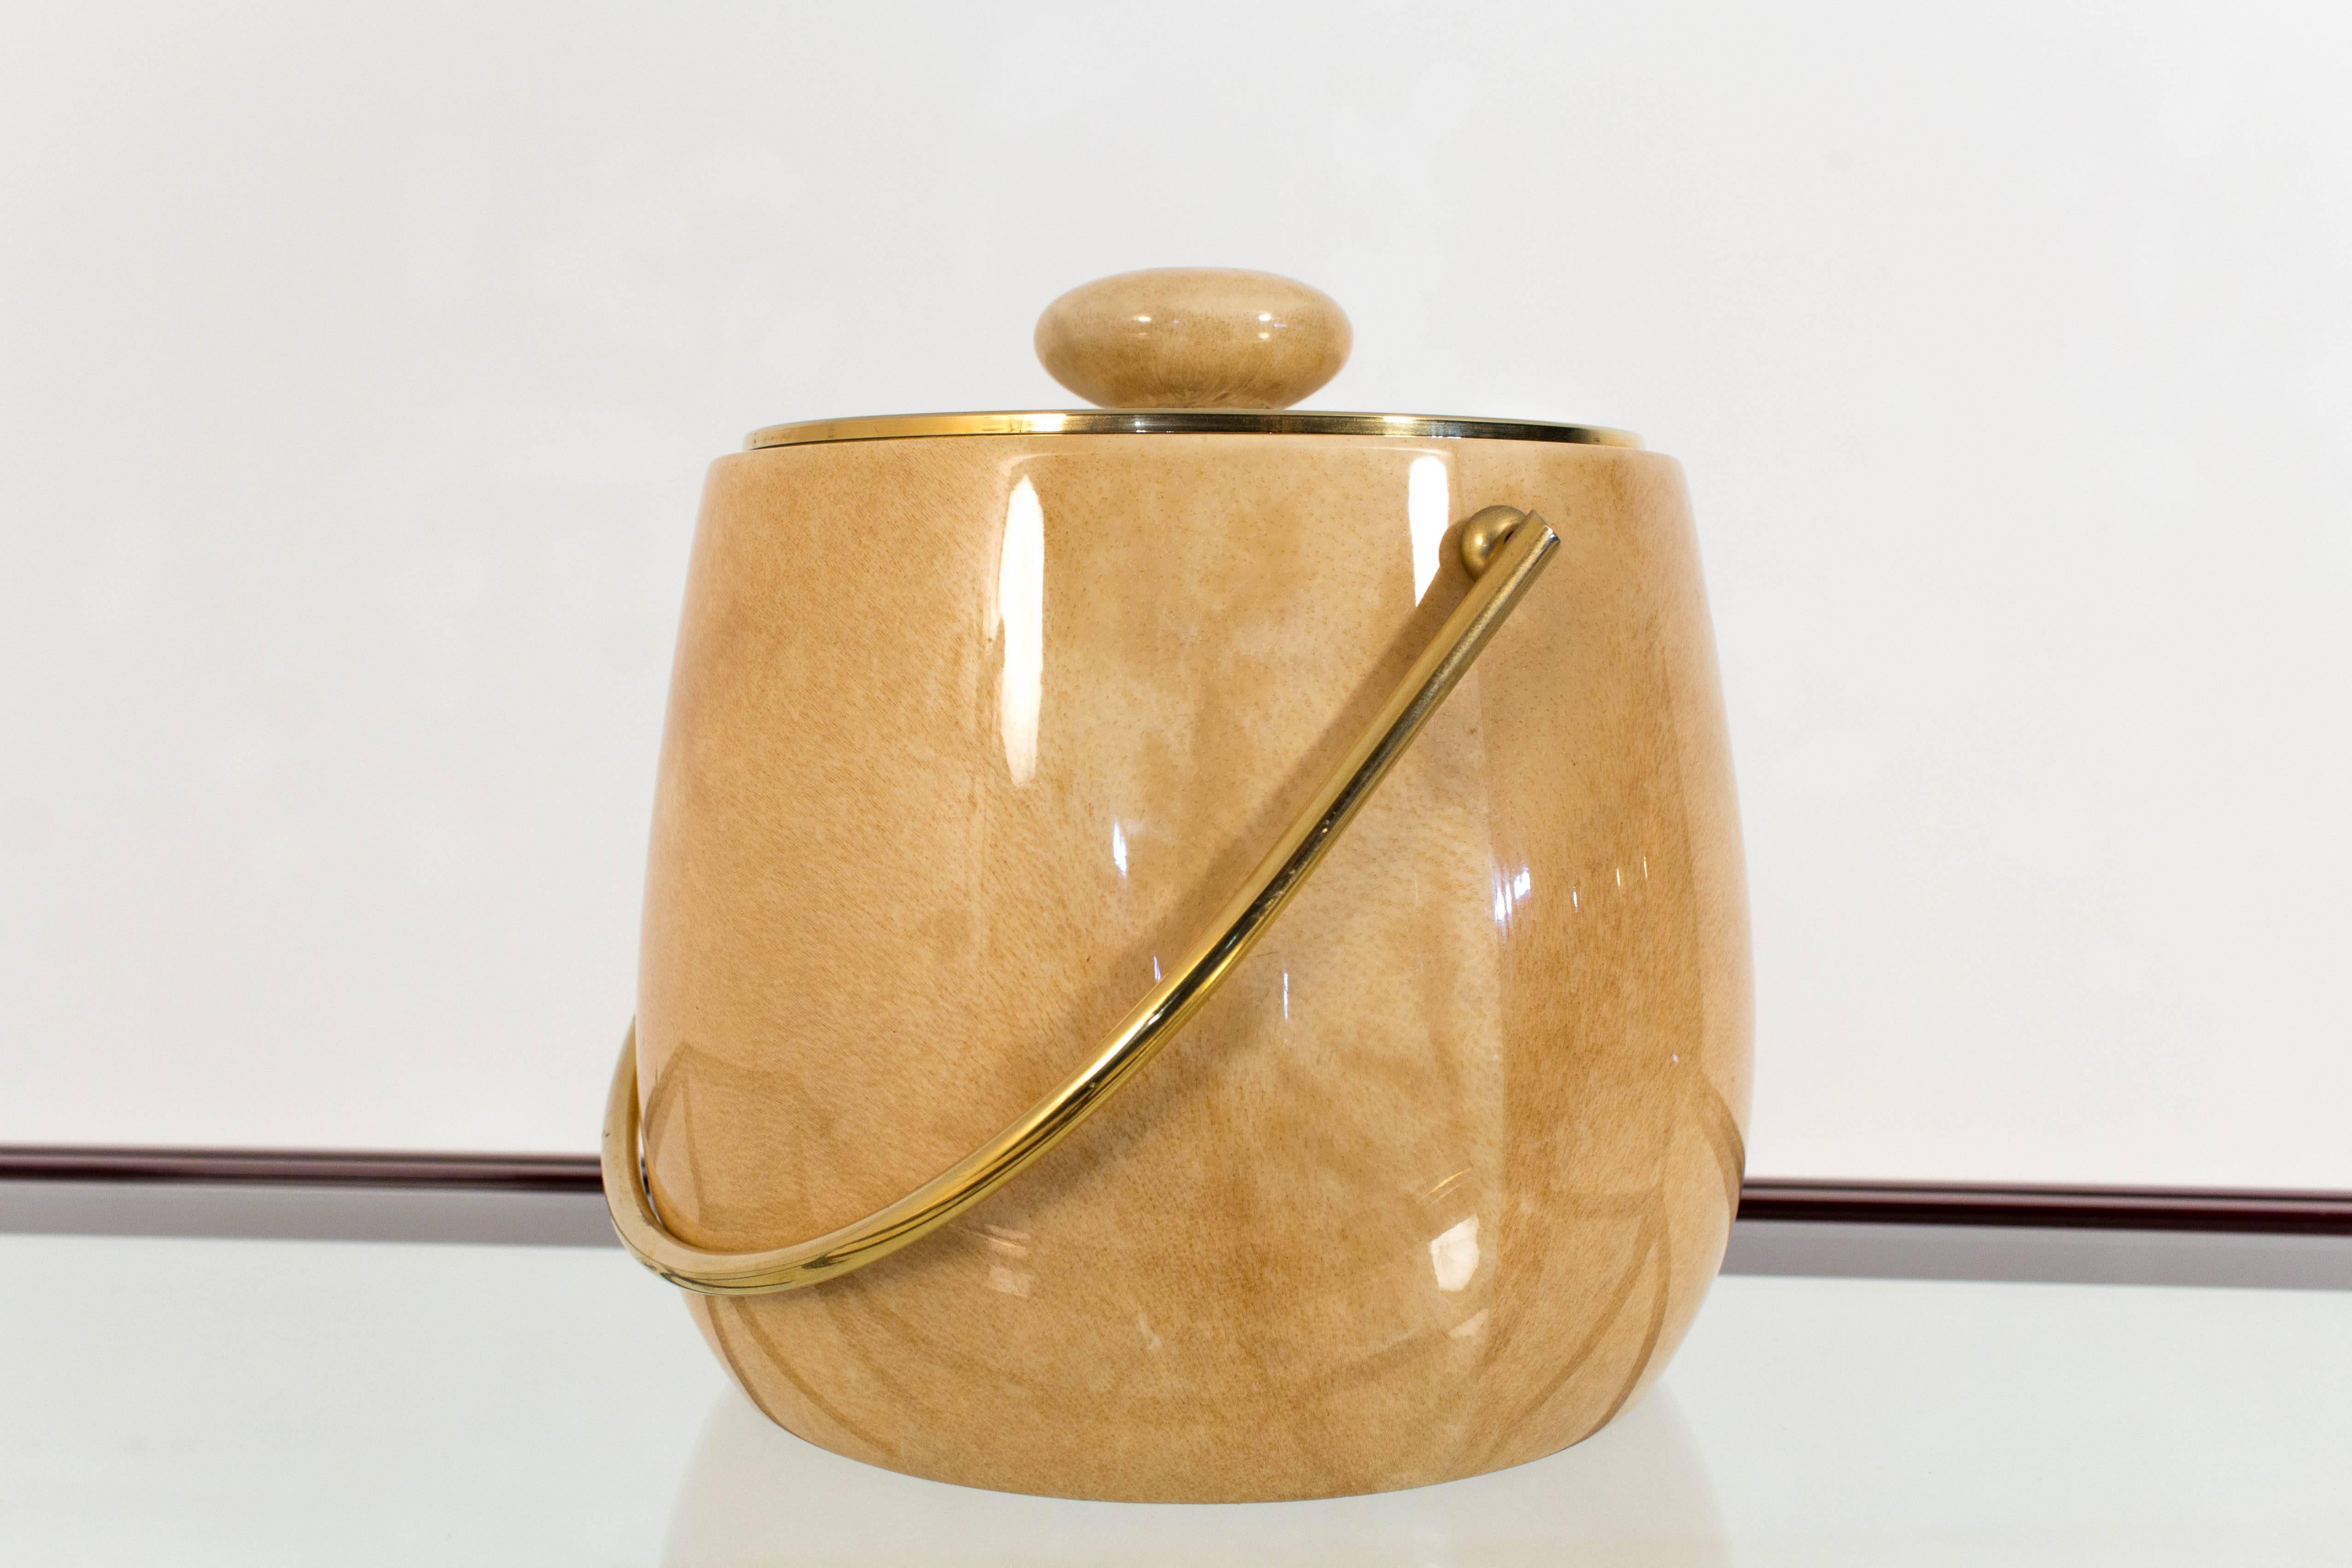 Elegant Mid-Century Modern ice bucket in goatskin by Aldo Tura.
Original lacquered goatskin with brass-plated handle.
Marked with original label.